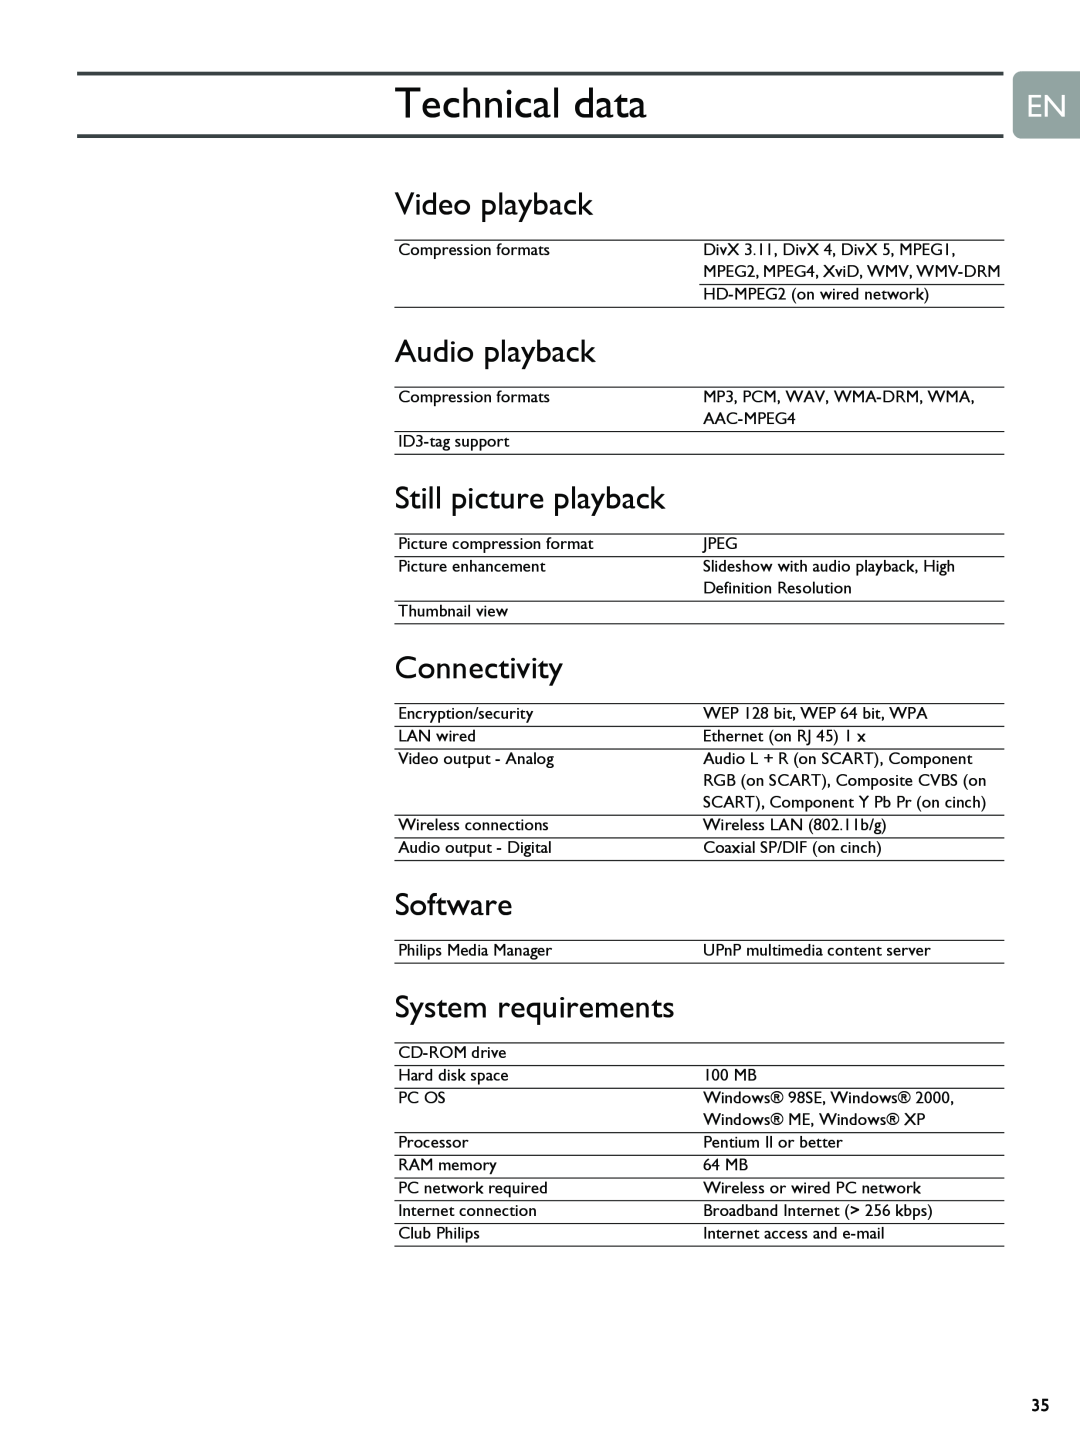 Philips SLM5500 user manual Technical data, Video playback, Audio playback, Still picture playback, Connectivity, Software 